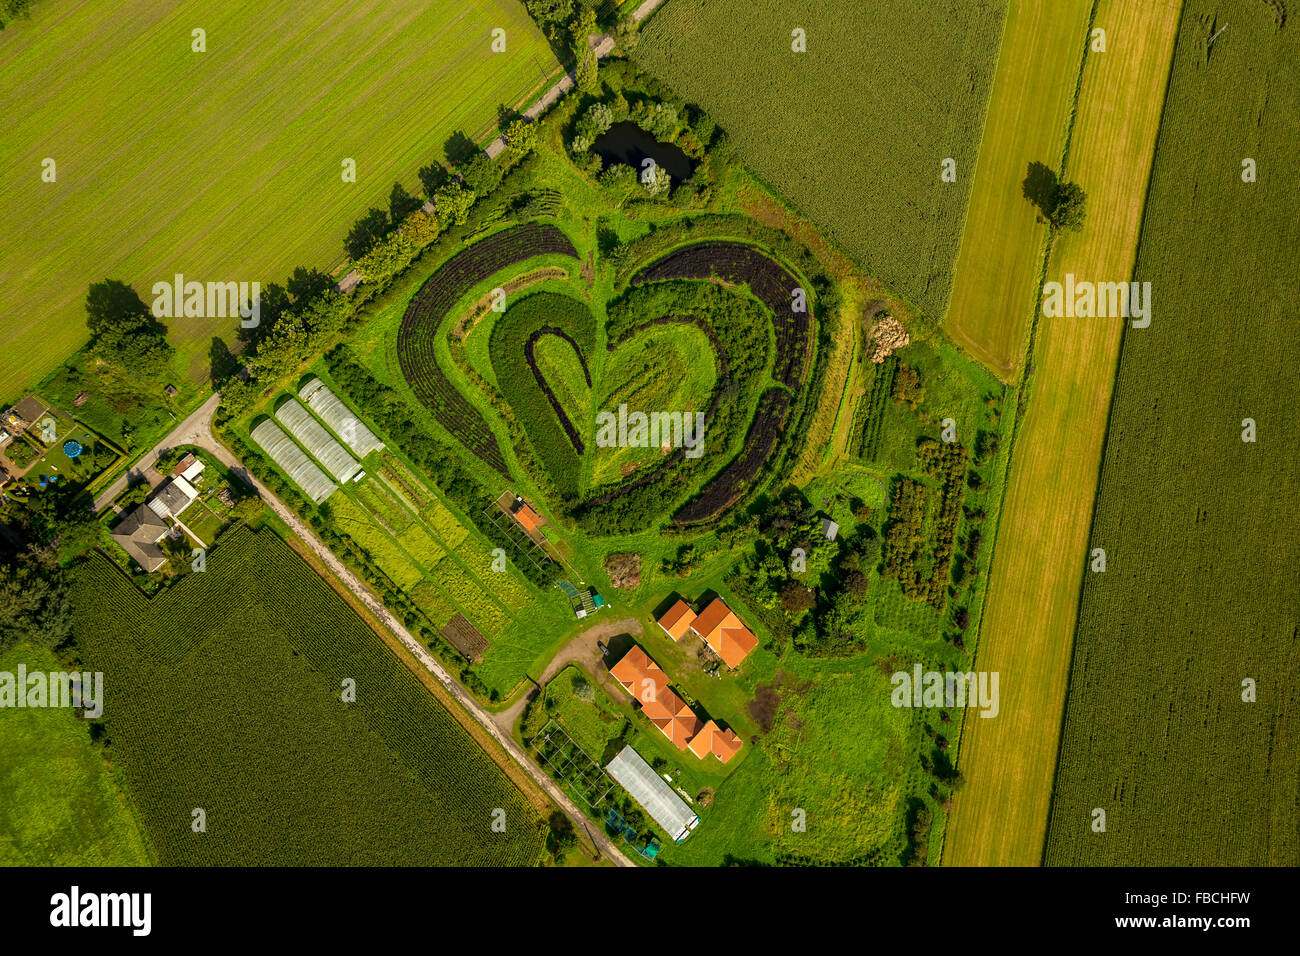 Aerial, Horticulture in Waltrop, heart shape, heart-shaped beds, heart, horticultural farm,, Waltrop, Ruhr area, Stock Photo